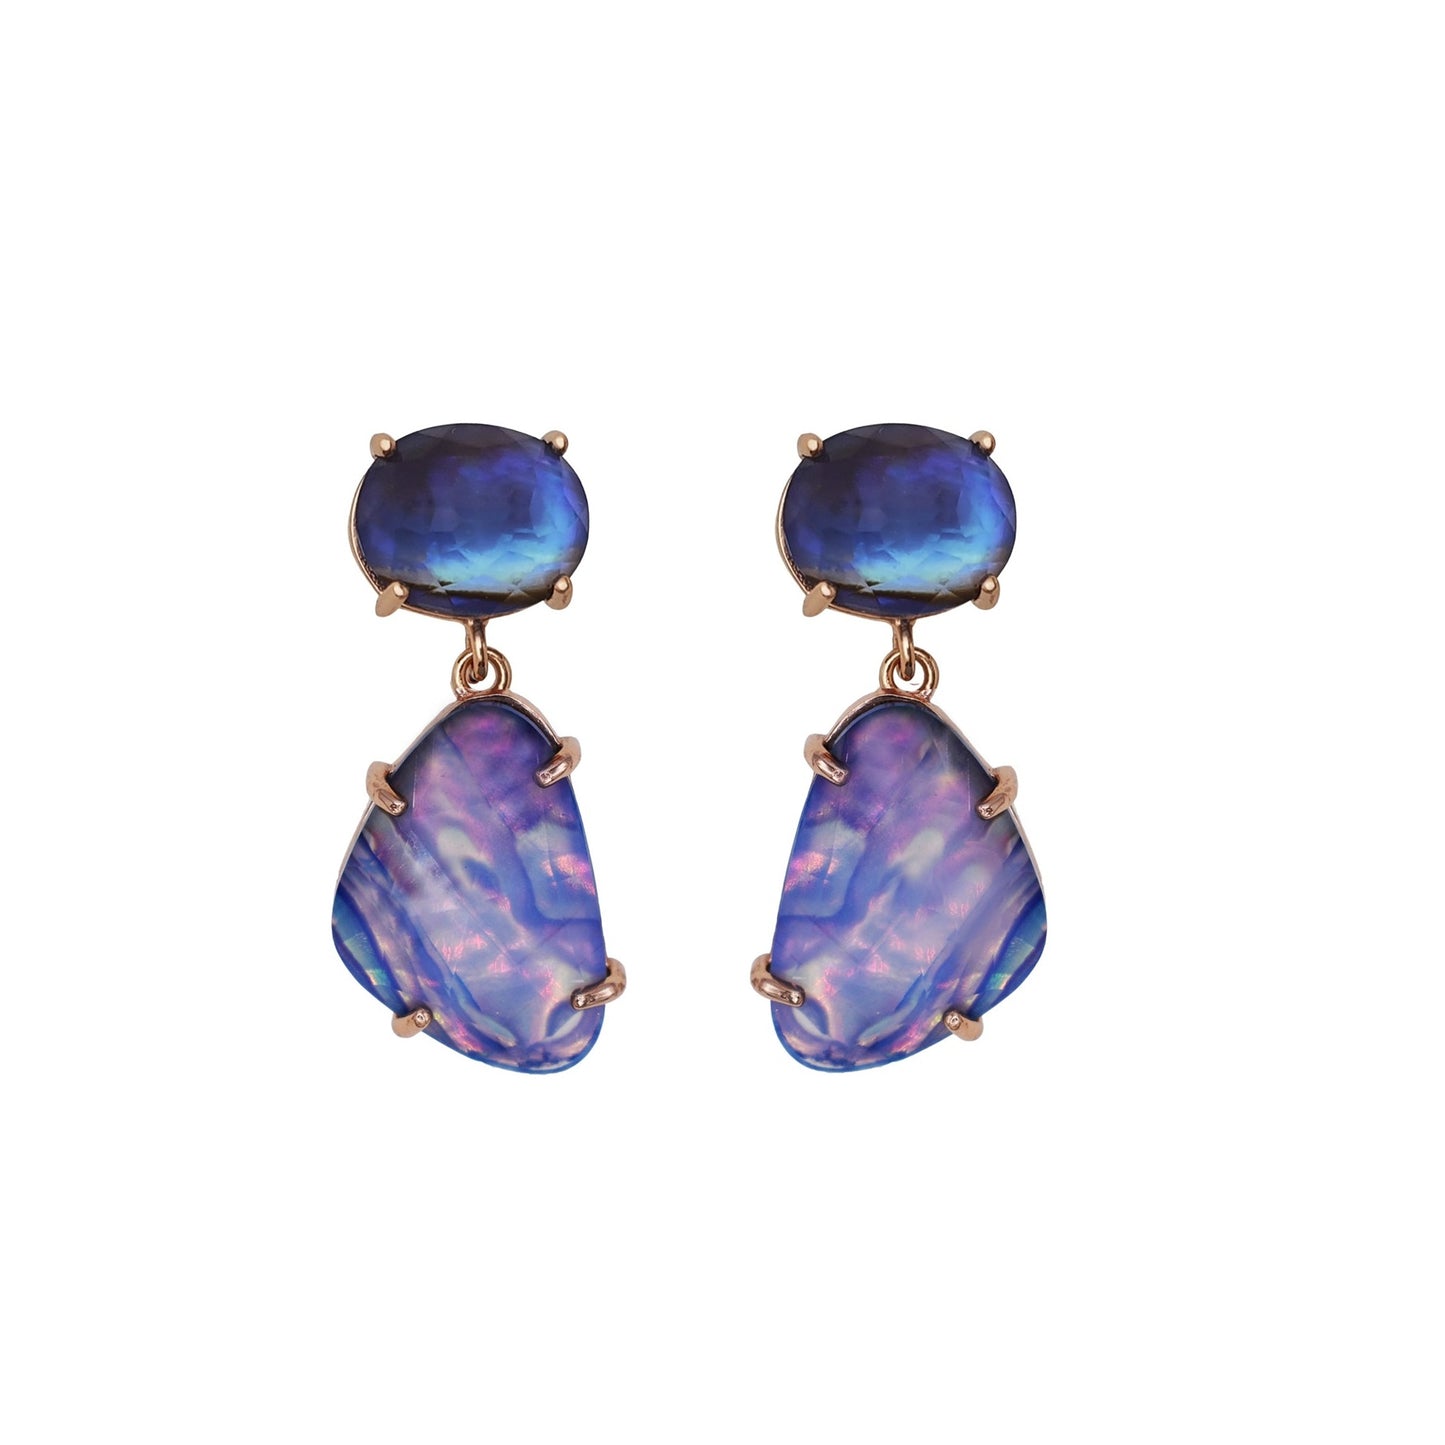  Multi colored abalone stone earrings with beautiful sparkling